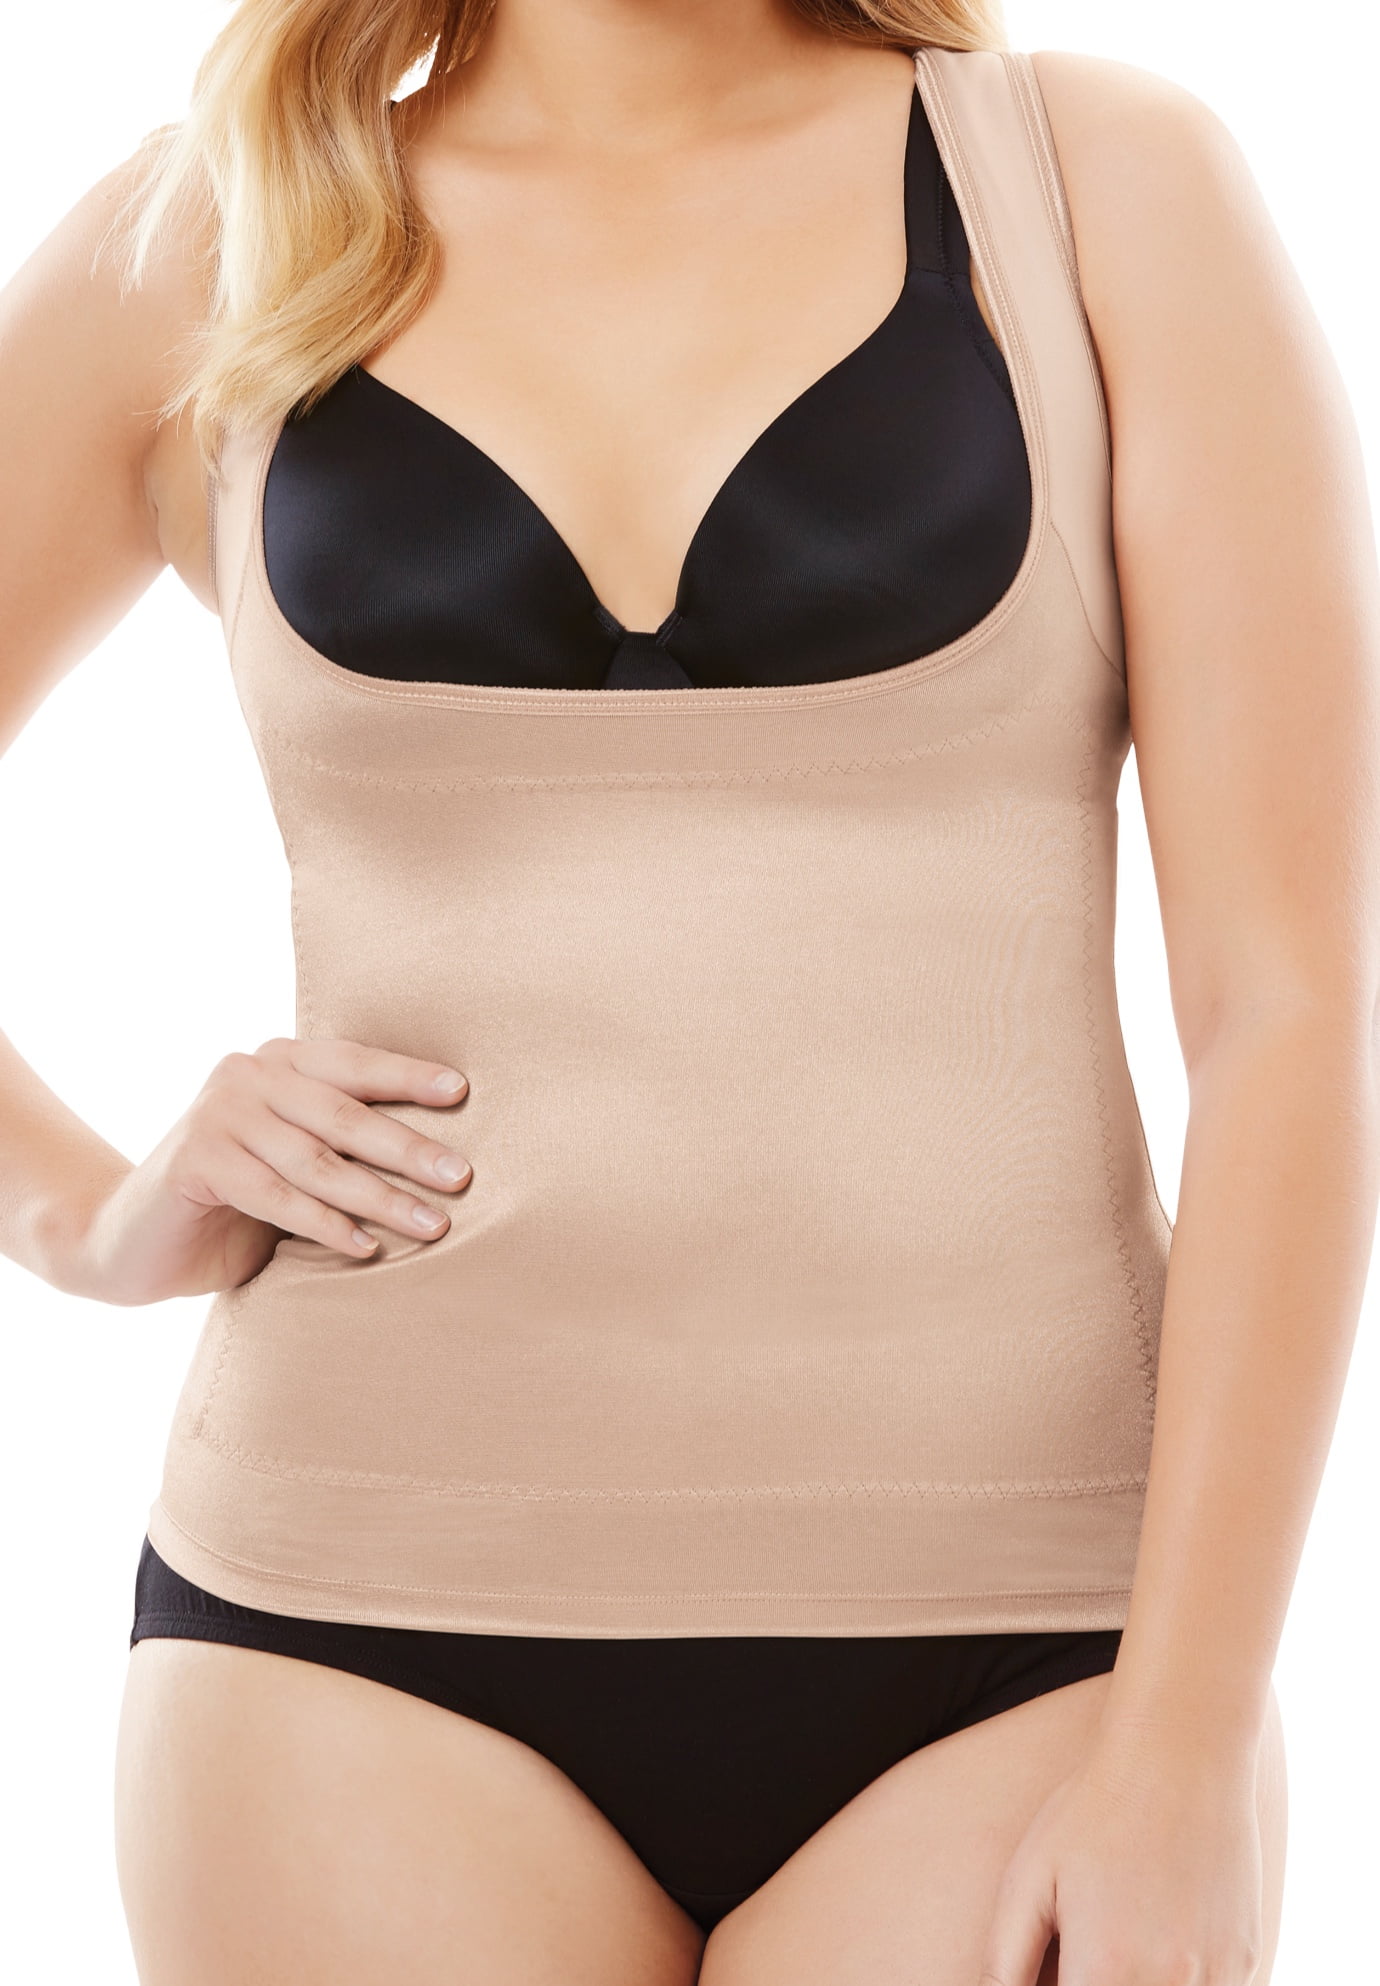 New SHAPEWEAR CURVE Lace Control Body Wear Your Own Bra in Nude PLUS SIZE 